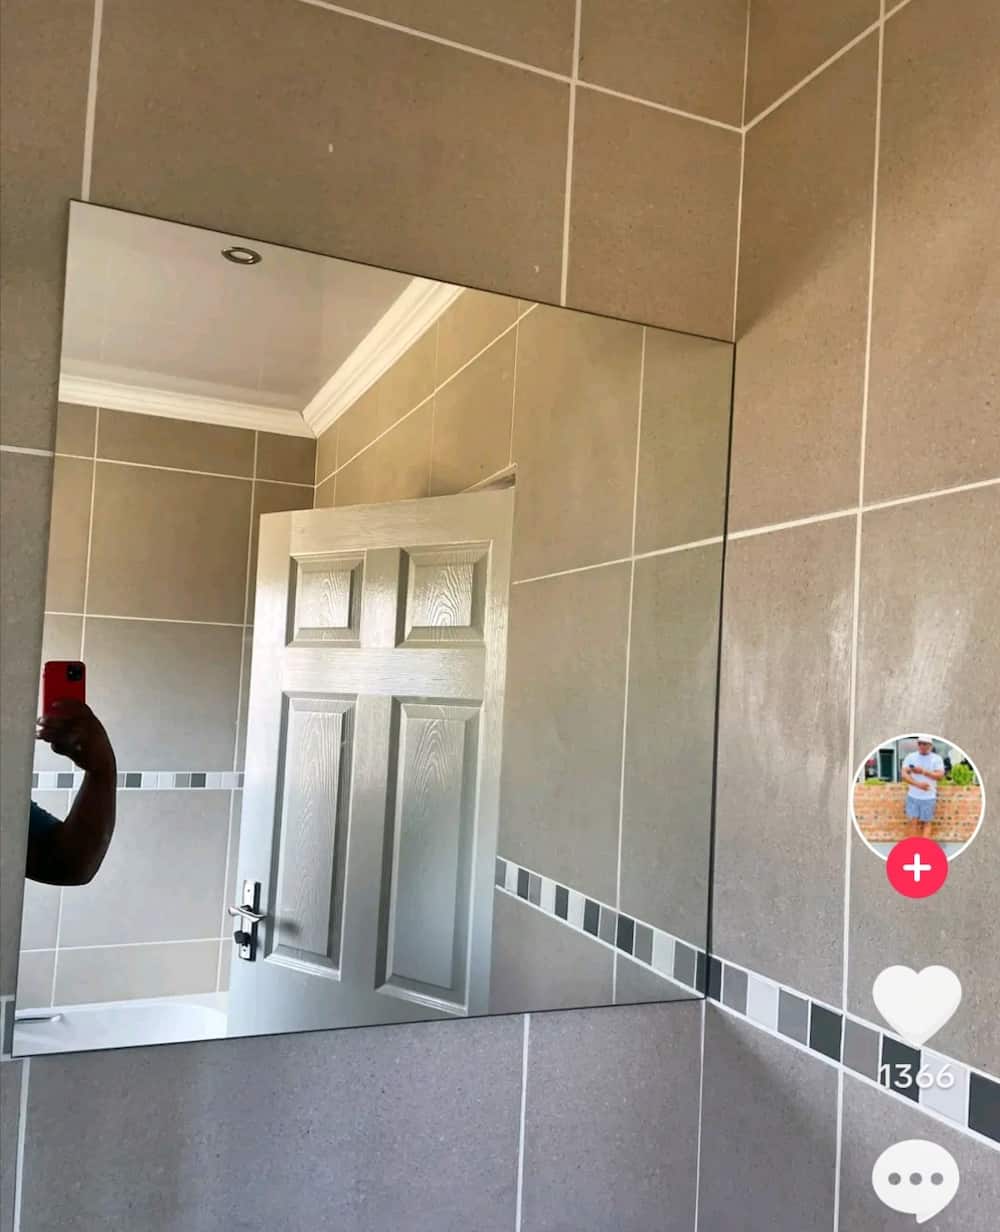 The Proud homeowner took a pic of his beautiful bathroom.